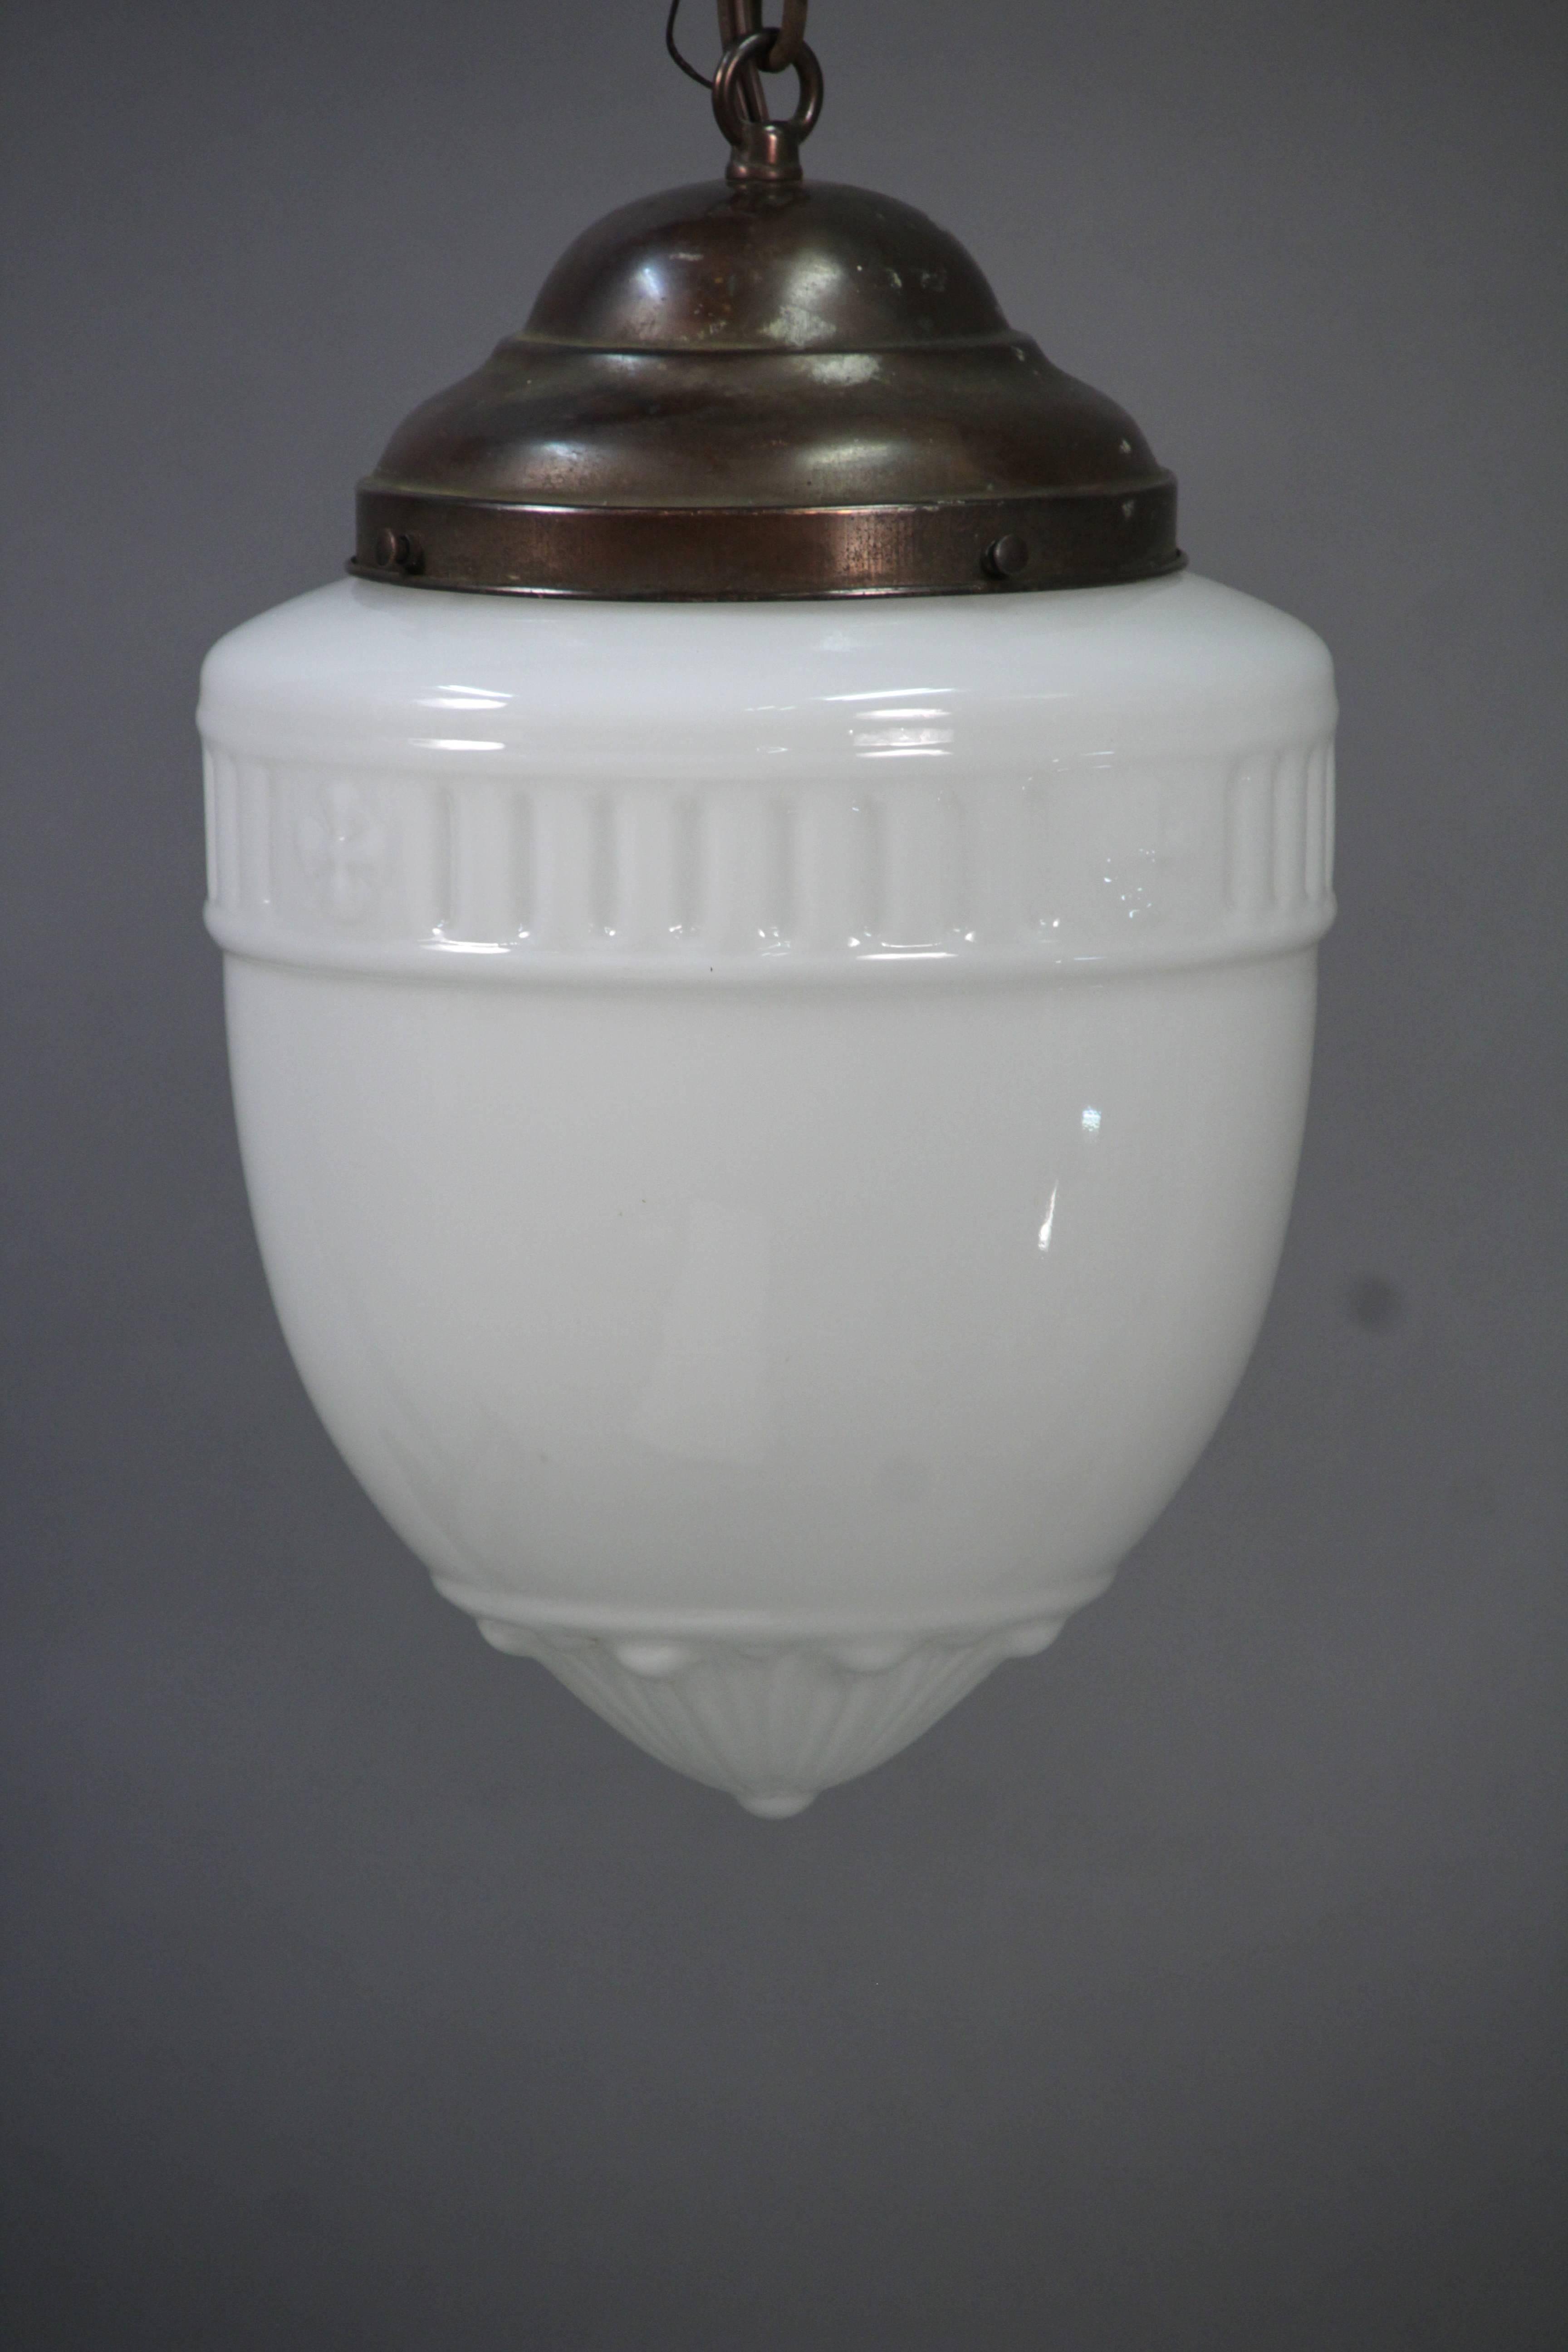 Pendant with glass shade, circa 1930s.